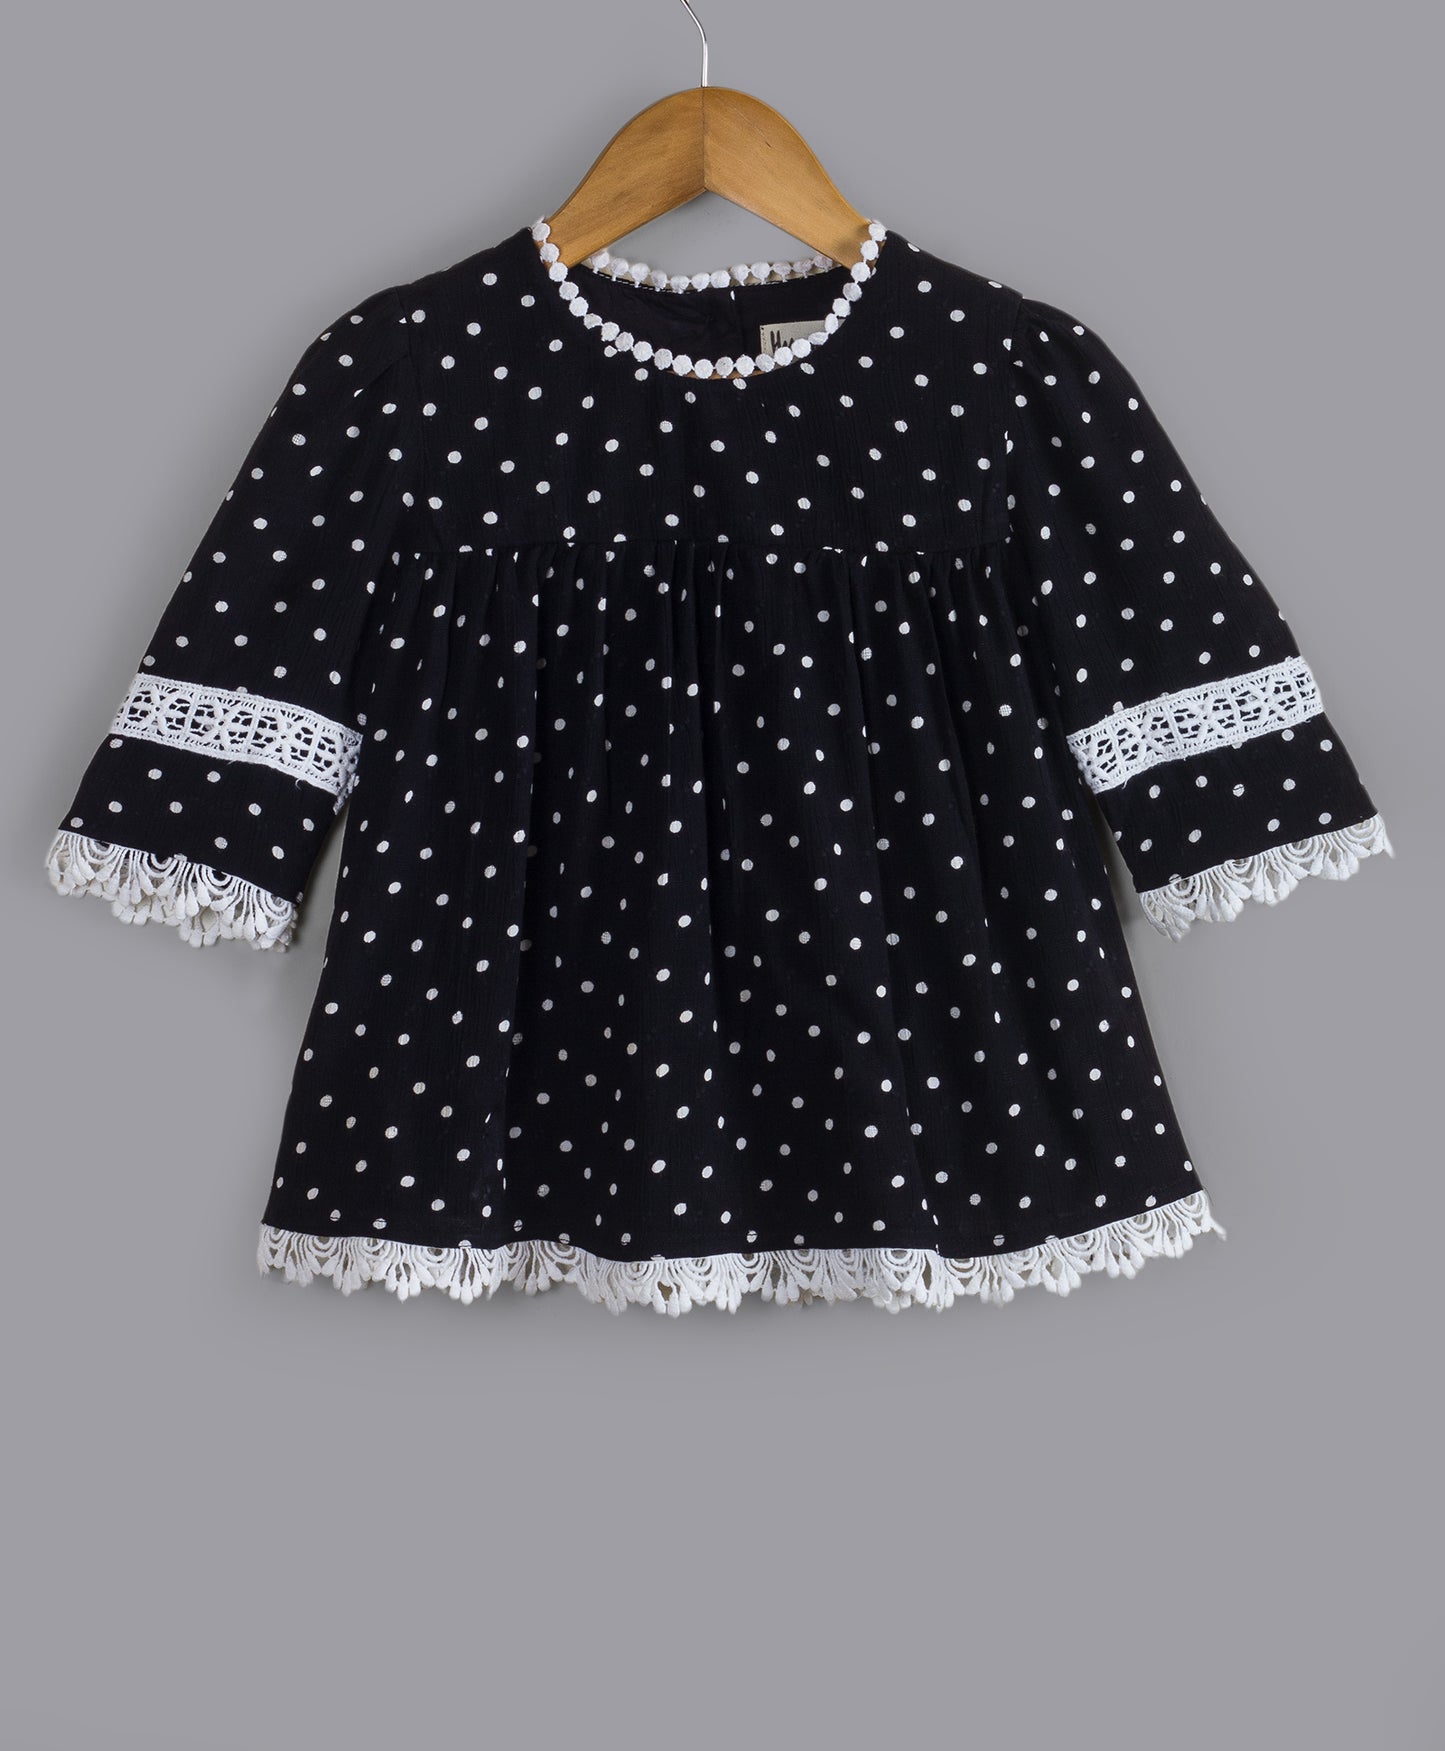 BLACK DOT PRINT TOP WITH CONTRAST LACE